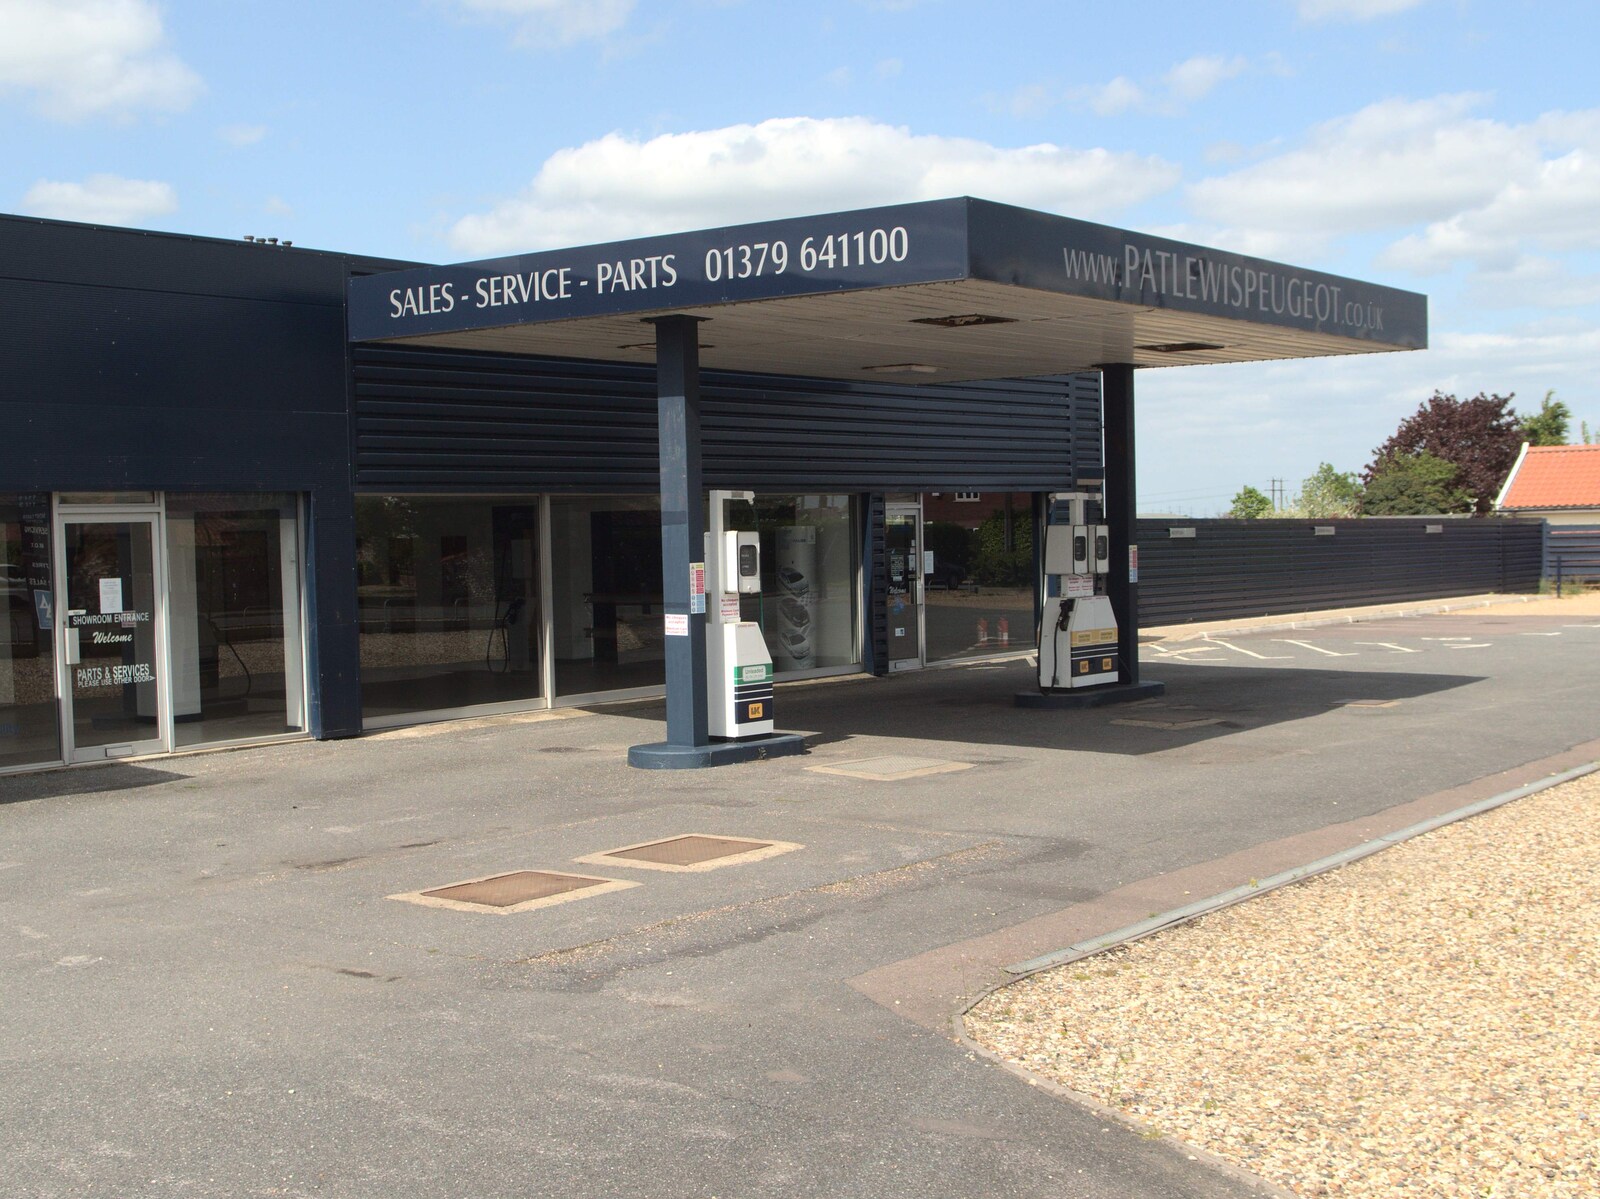 The old Pat Lewis garage in Palgrave from A Derelict Petrol Station, Palgrave, Suffolk - 16th May 2015